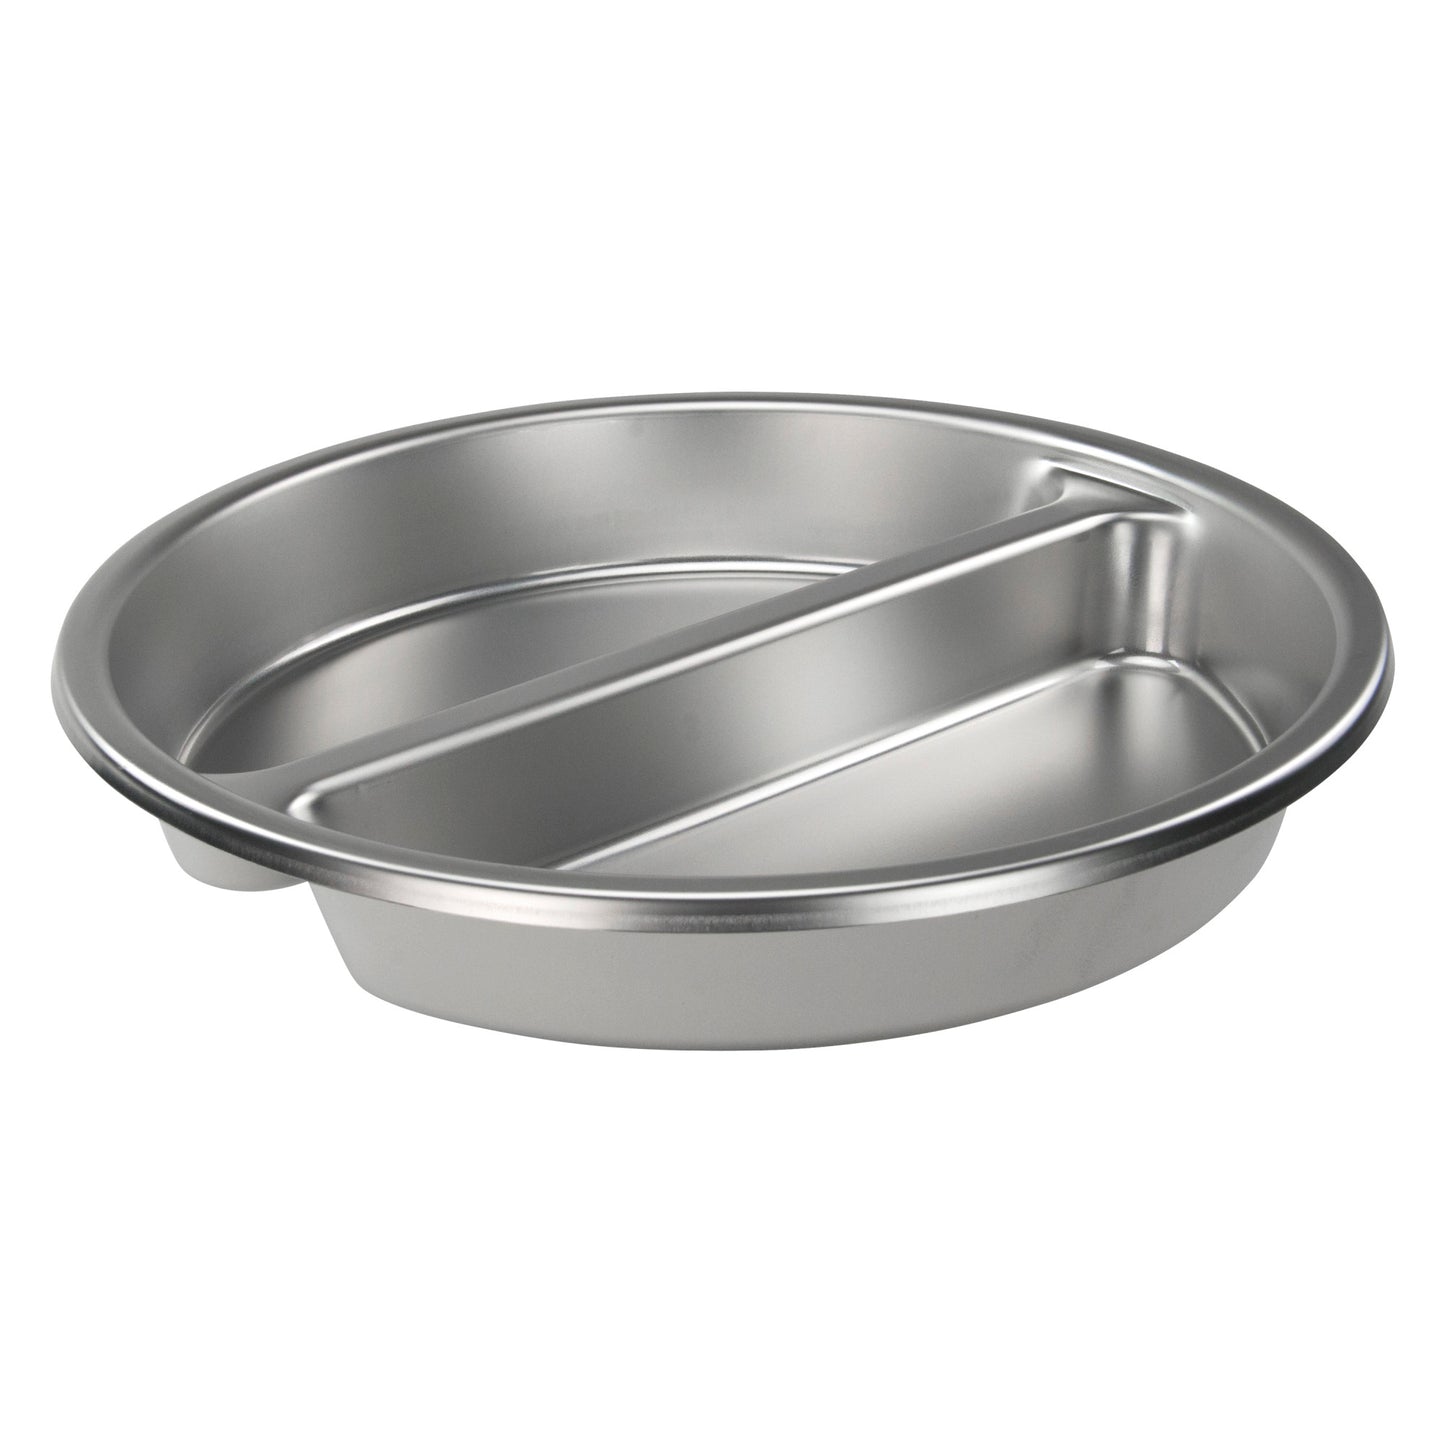 SPFD-2R - Divided Food Pan for 103A/B, 308A, 602